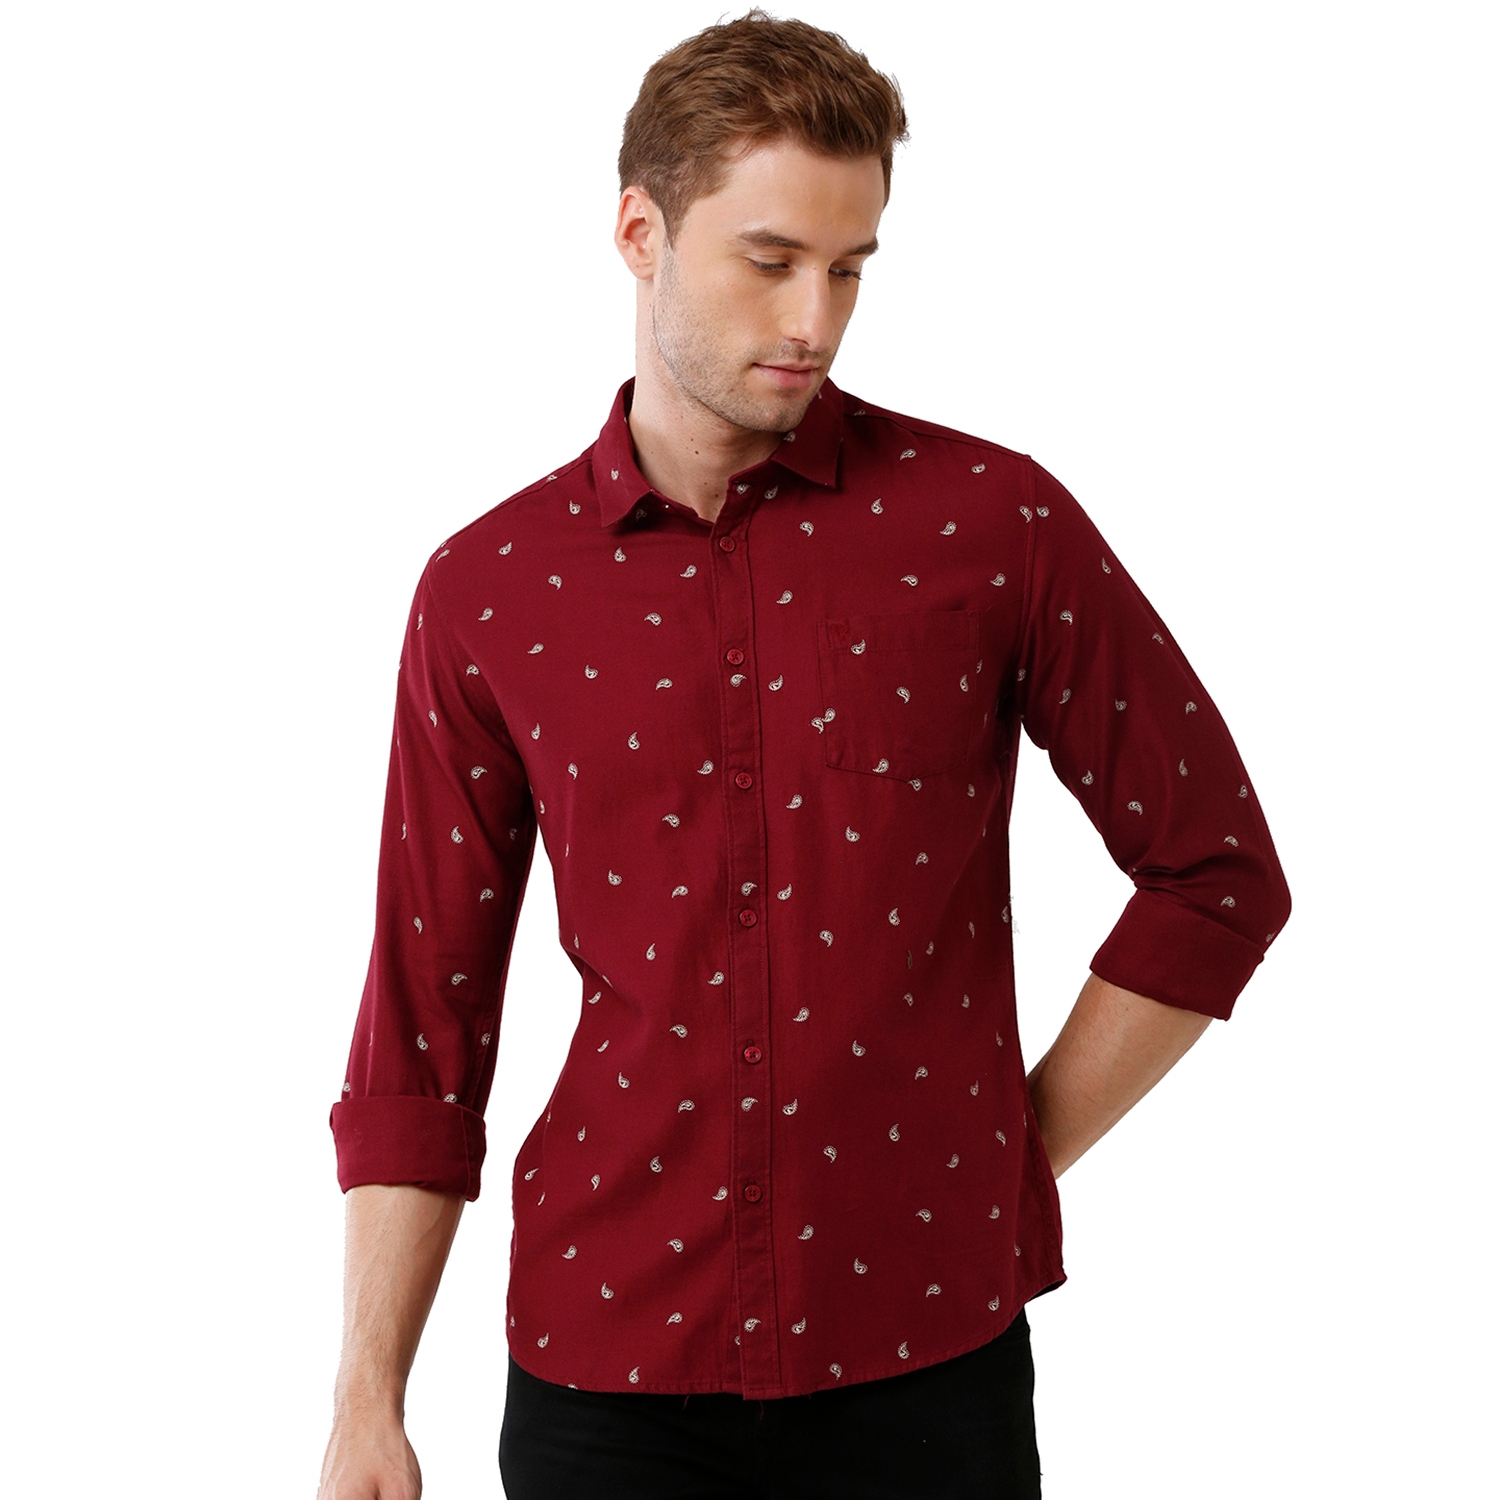 Swiss club | Swiss Club Mens 100% Cotton Printed Full Sleeve Slim Fit Polo Neck Red Color Woven Shirt (S-SC-123 A-FS-PRT-BSL)